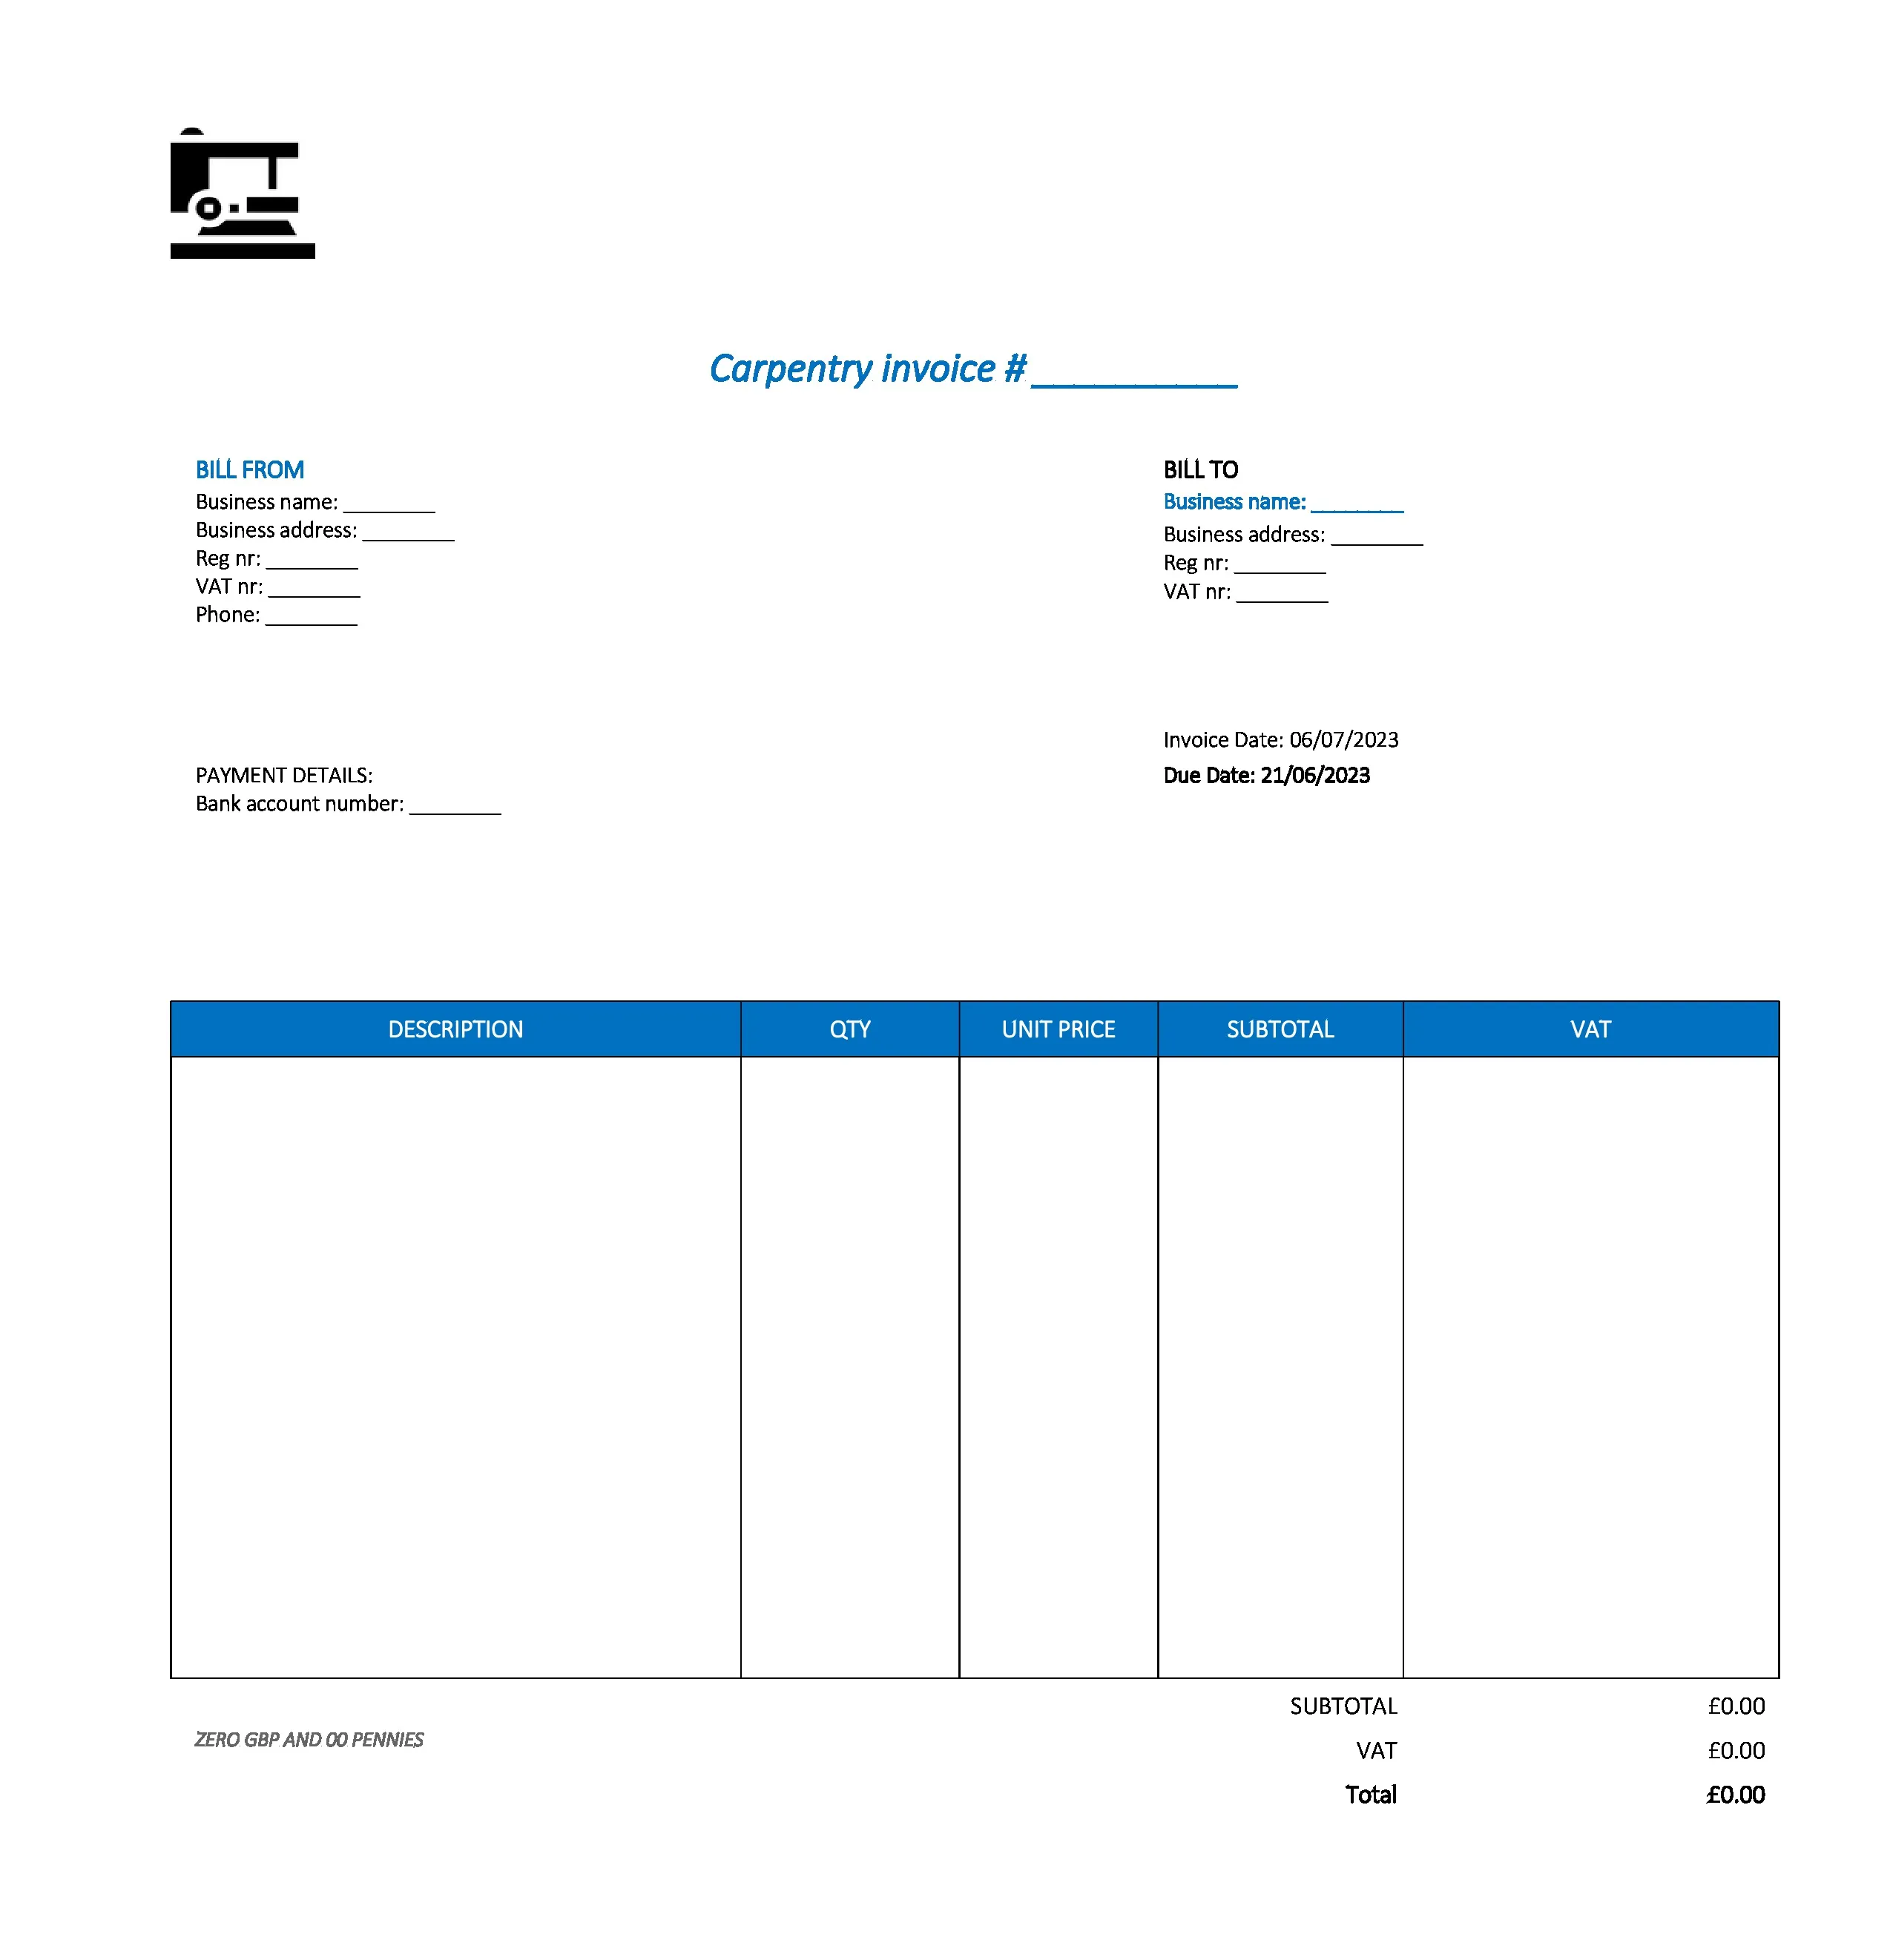 typical carpentry invoice template UK Excel / Google sheets